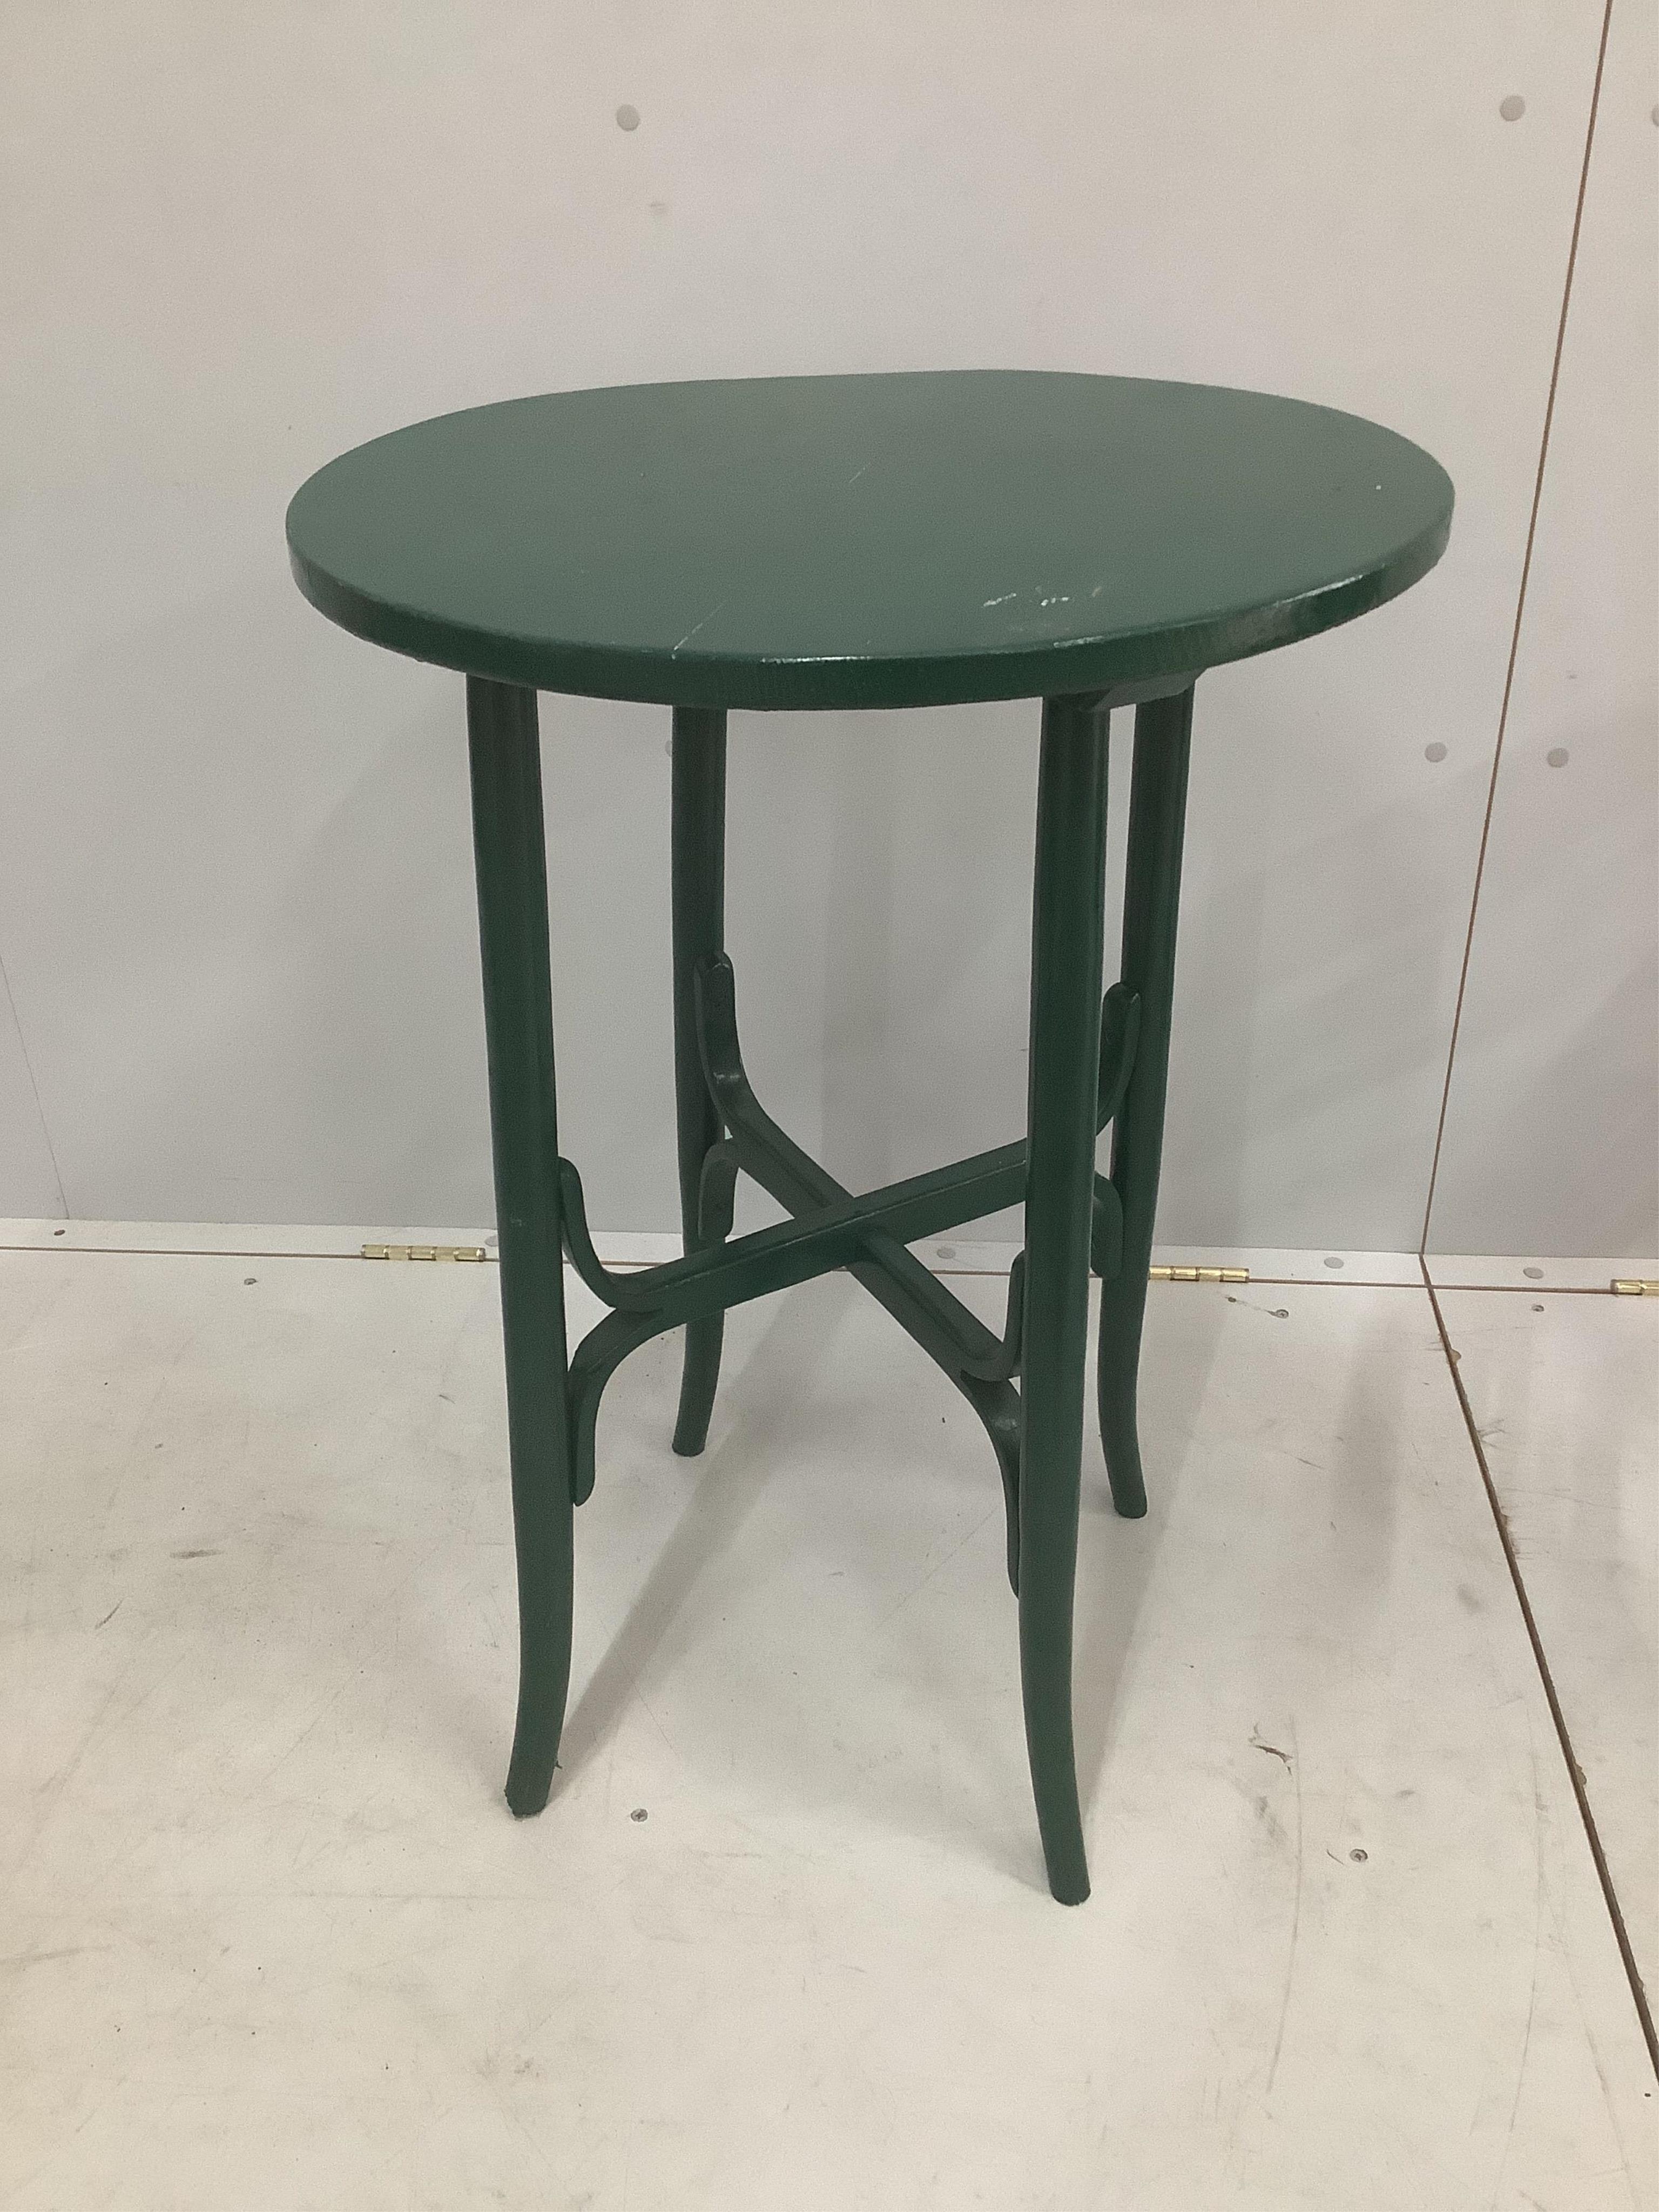 An early 20th century Thonet style circular painted occasional table, diameter 54cm, height 78cm. Condition - fair